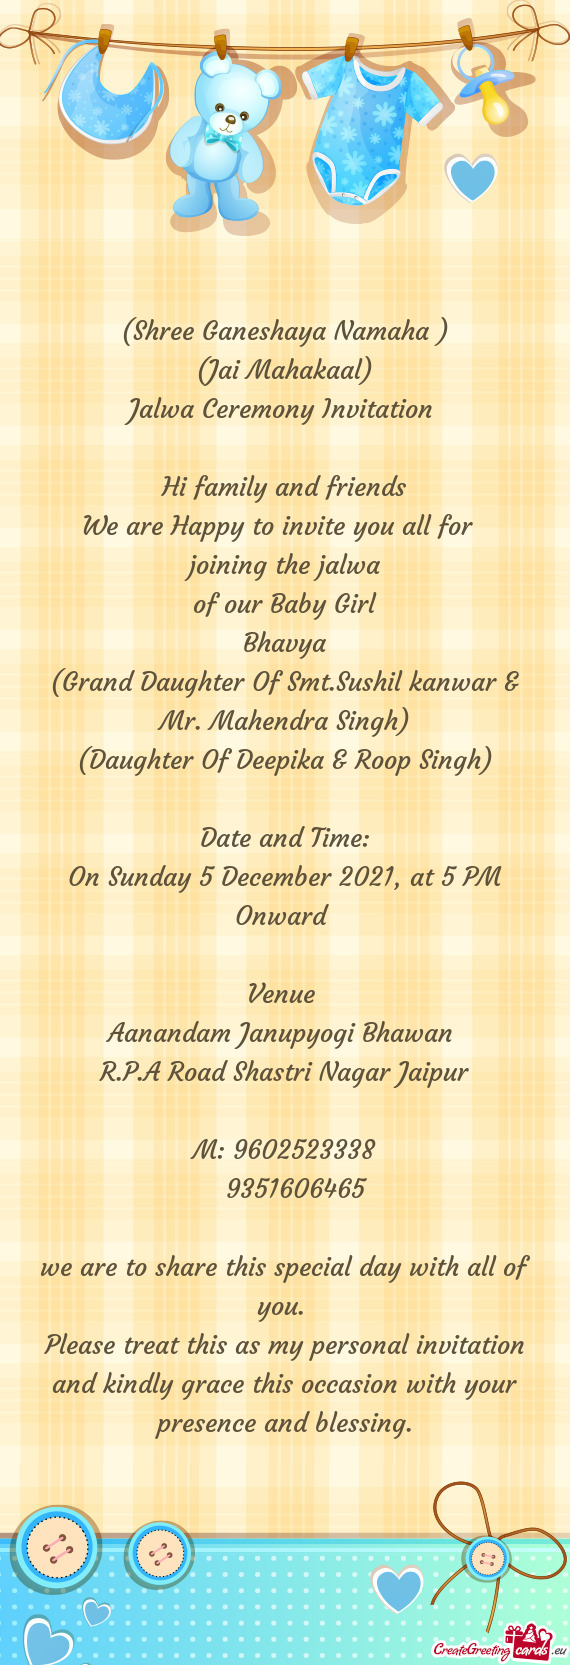 Re Happy to invite you all for 
 joining the jalwa 
 of our Baby Girl
 Bhavya
 (Grand Daughter Of